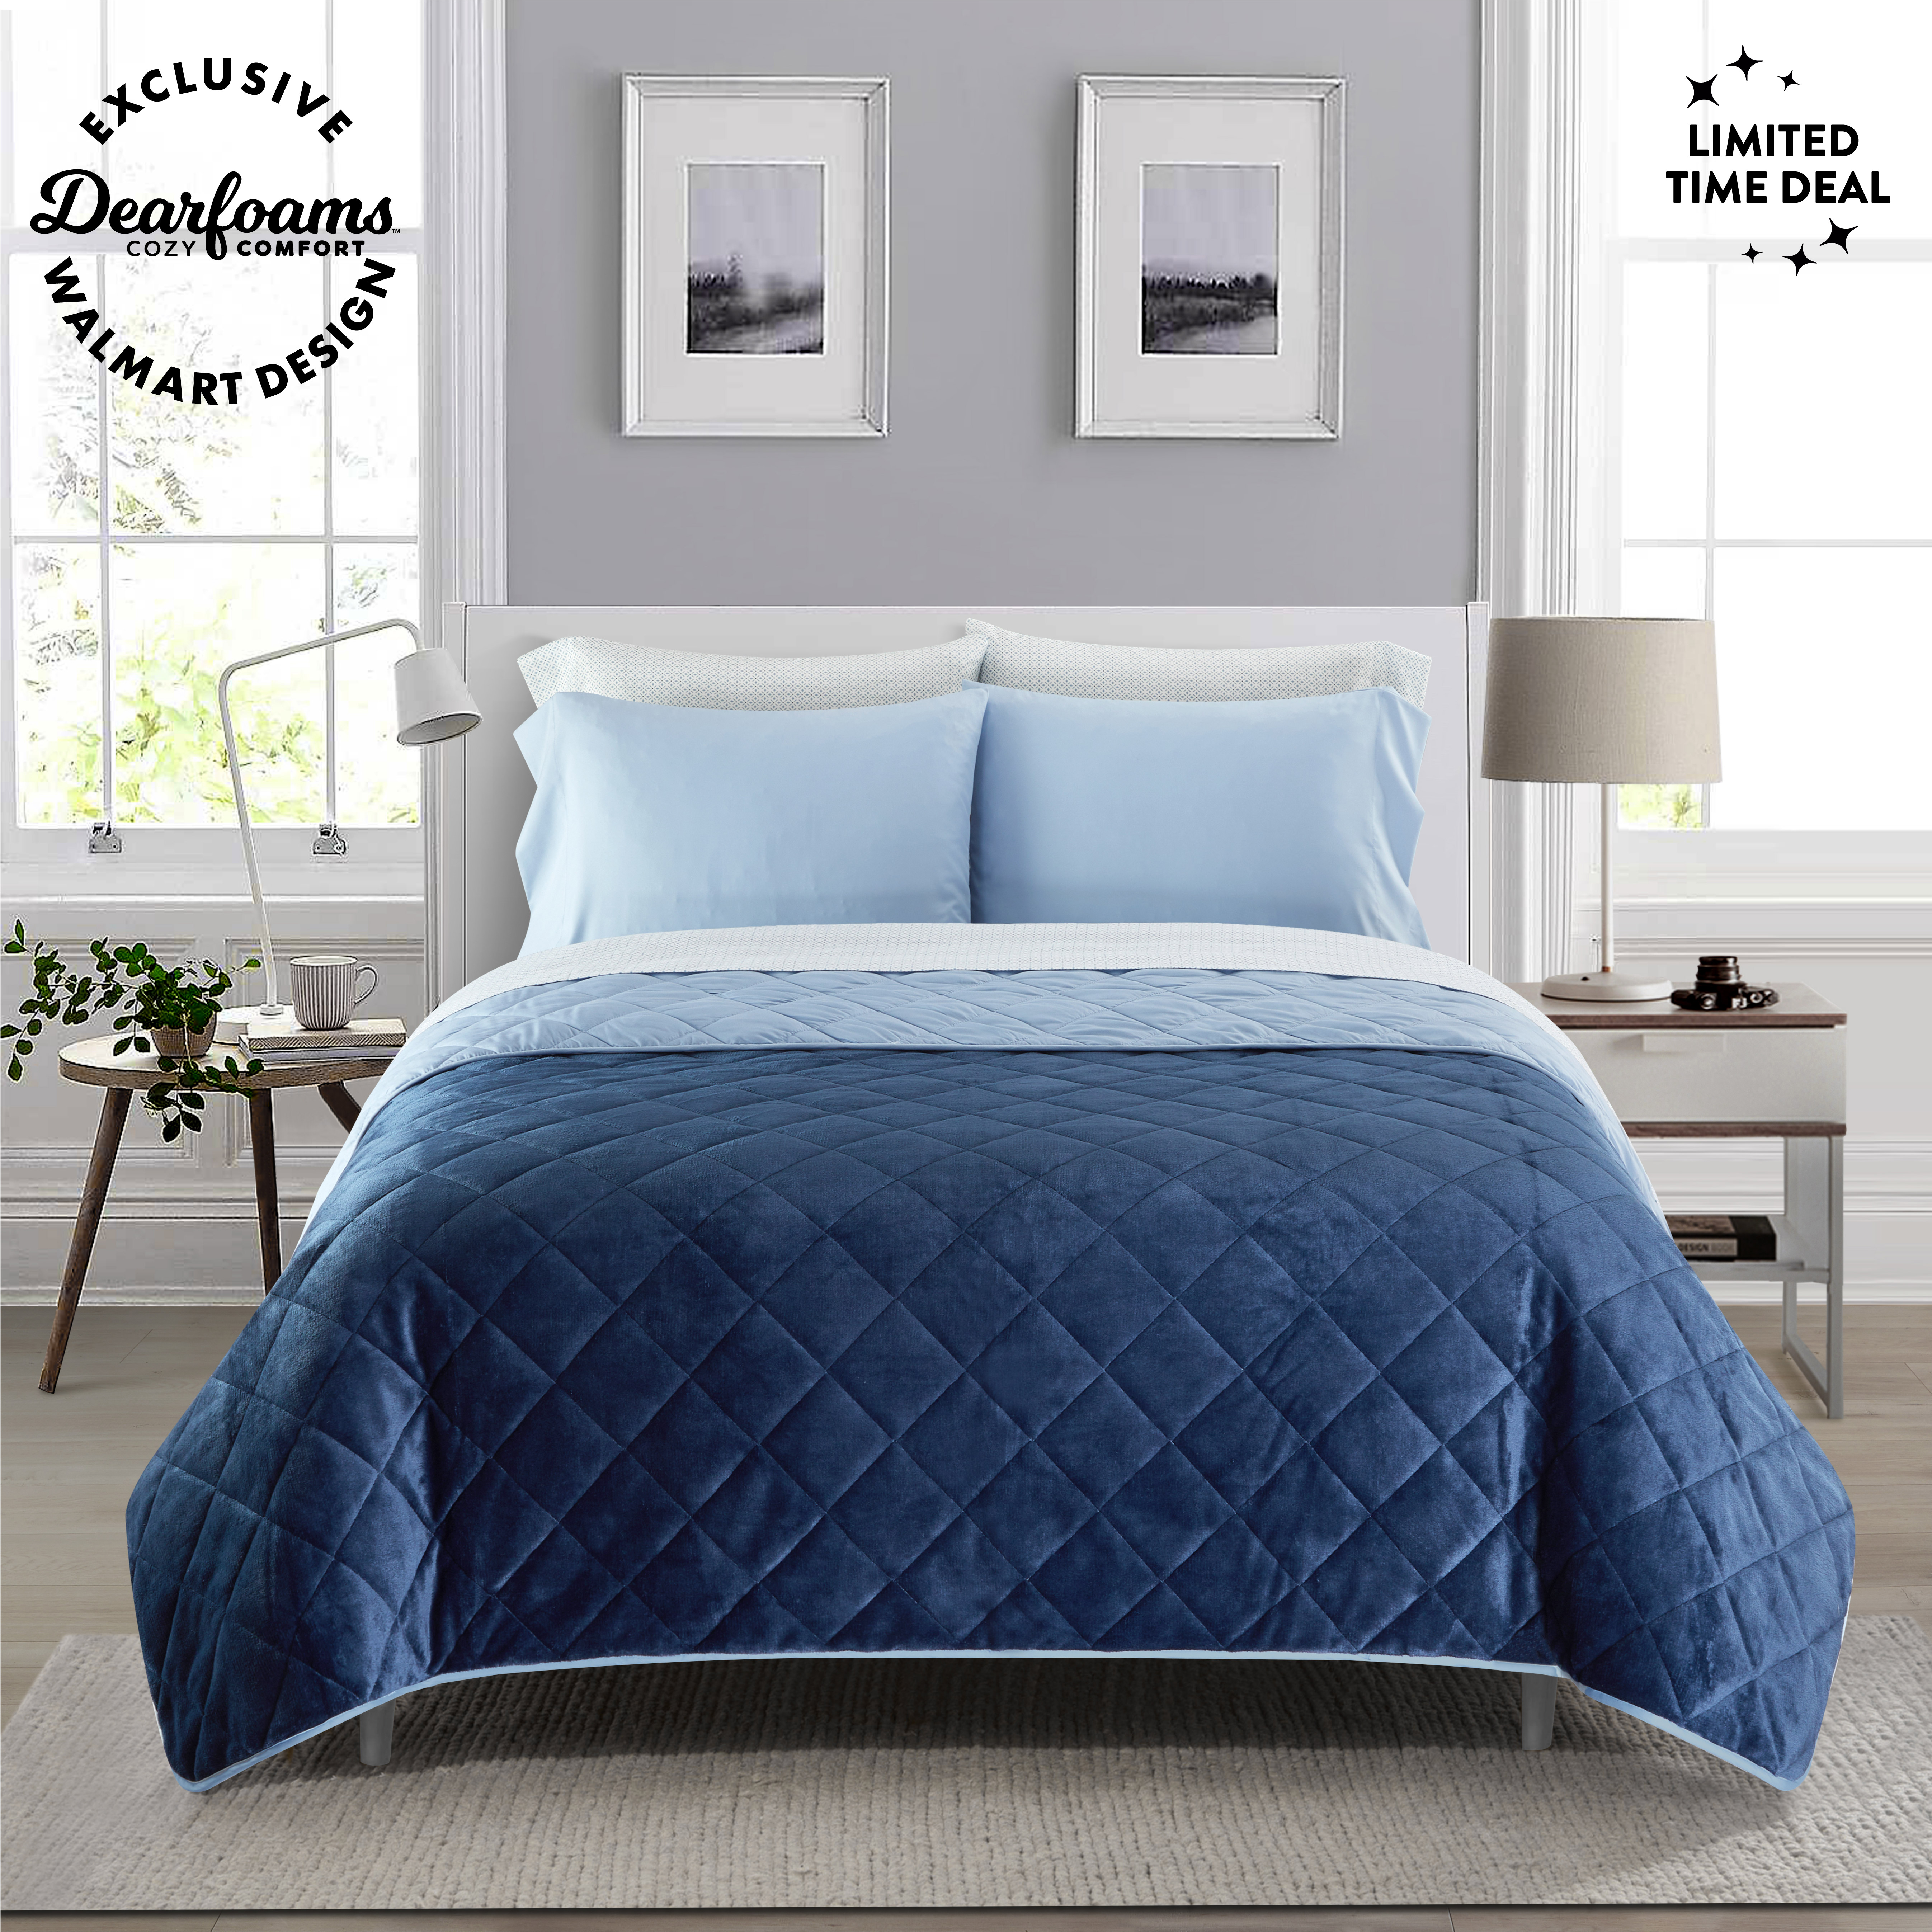 Dearfoams Navy Velvet Plush 7 Piece Quilt Bedding Set with Flannel Sheets, Full - image 2 of 7